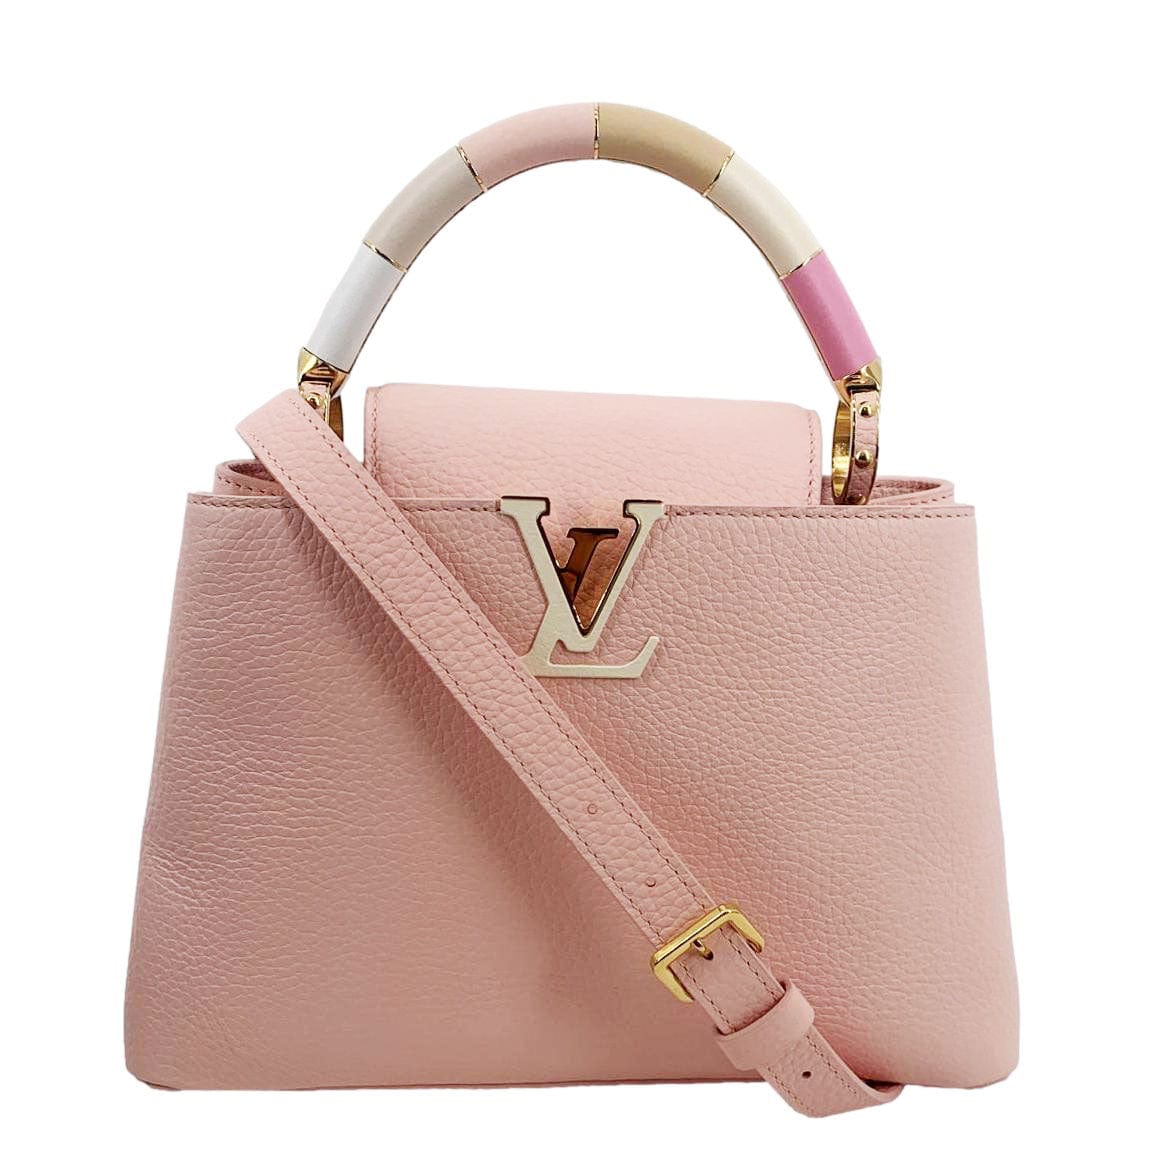 Capucines BB bag - Luxury Taurillon Leather White